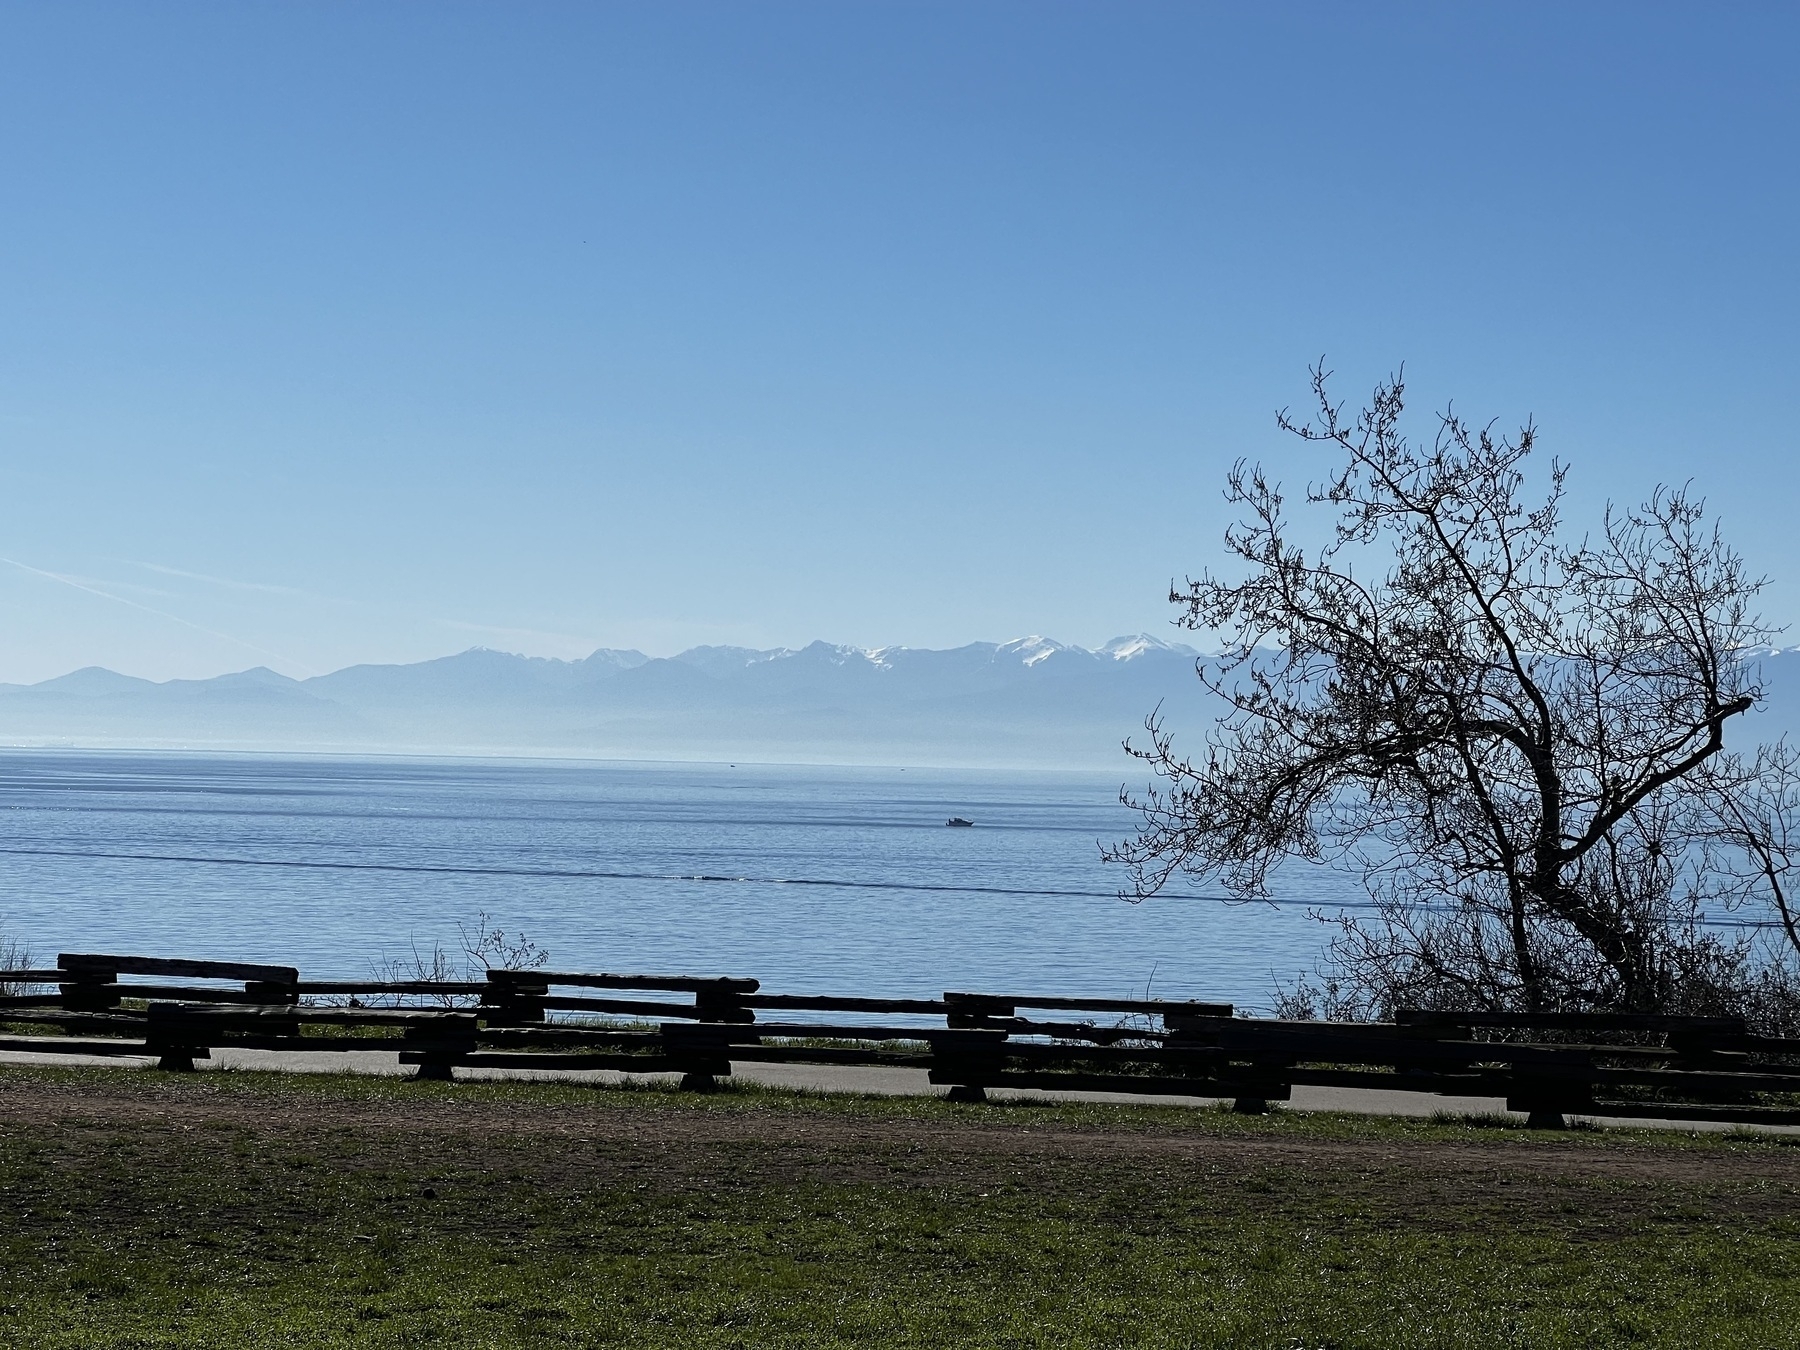 Another image of the Olympic Mountains, this time with a grassy field in the foreground and a path lined with a rail-tie fence.